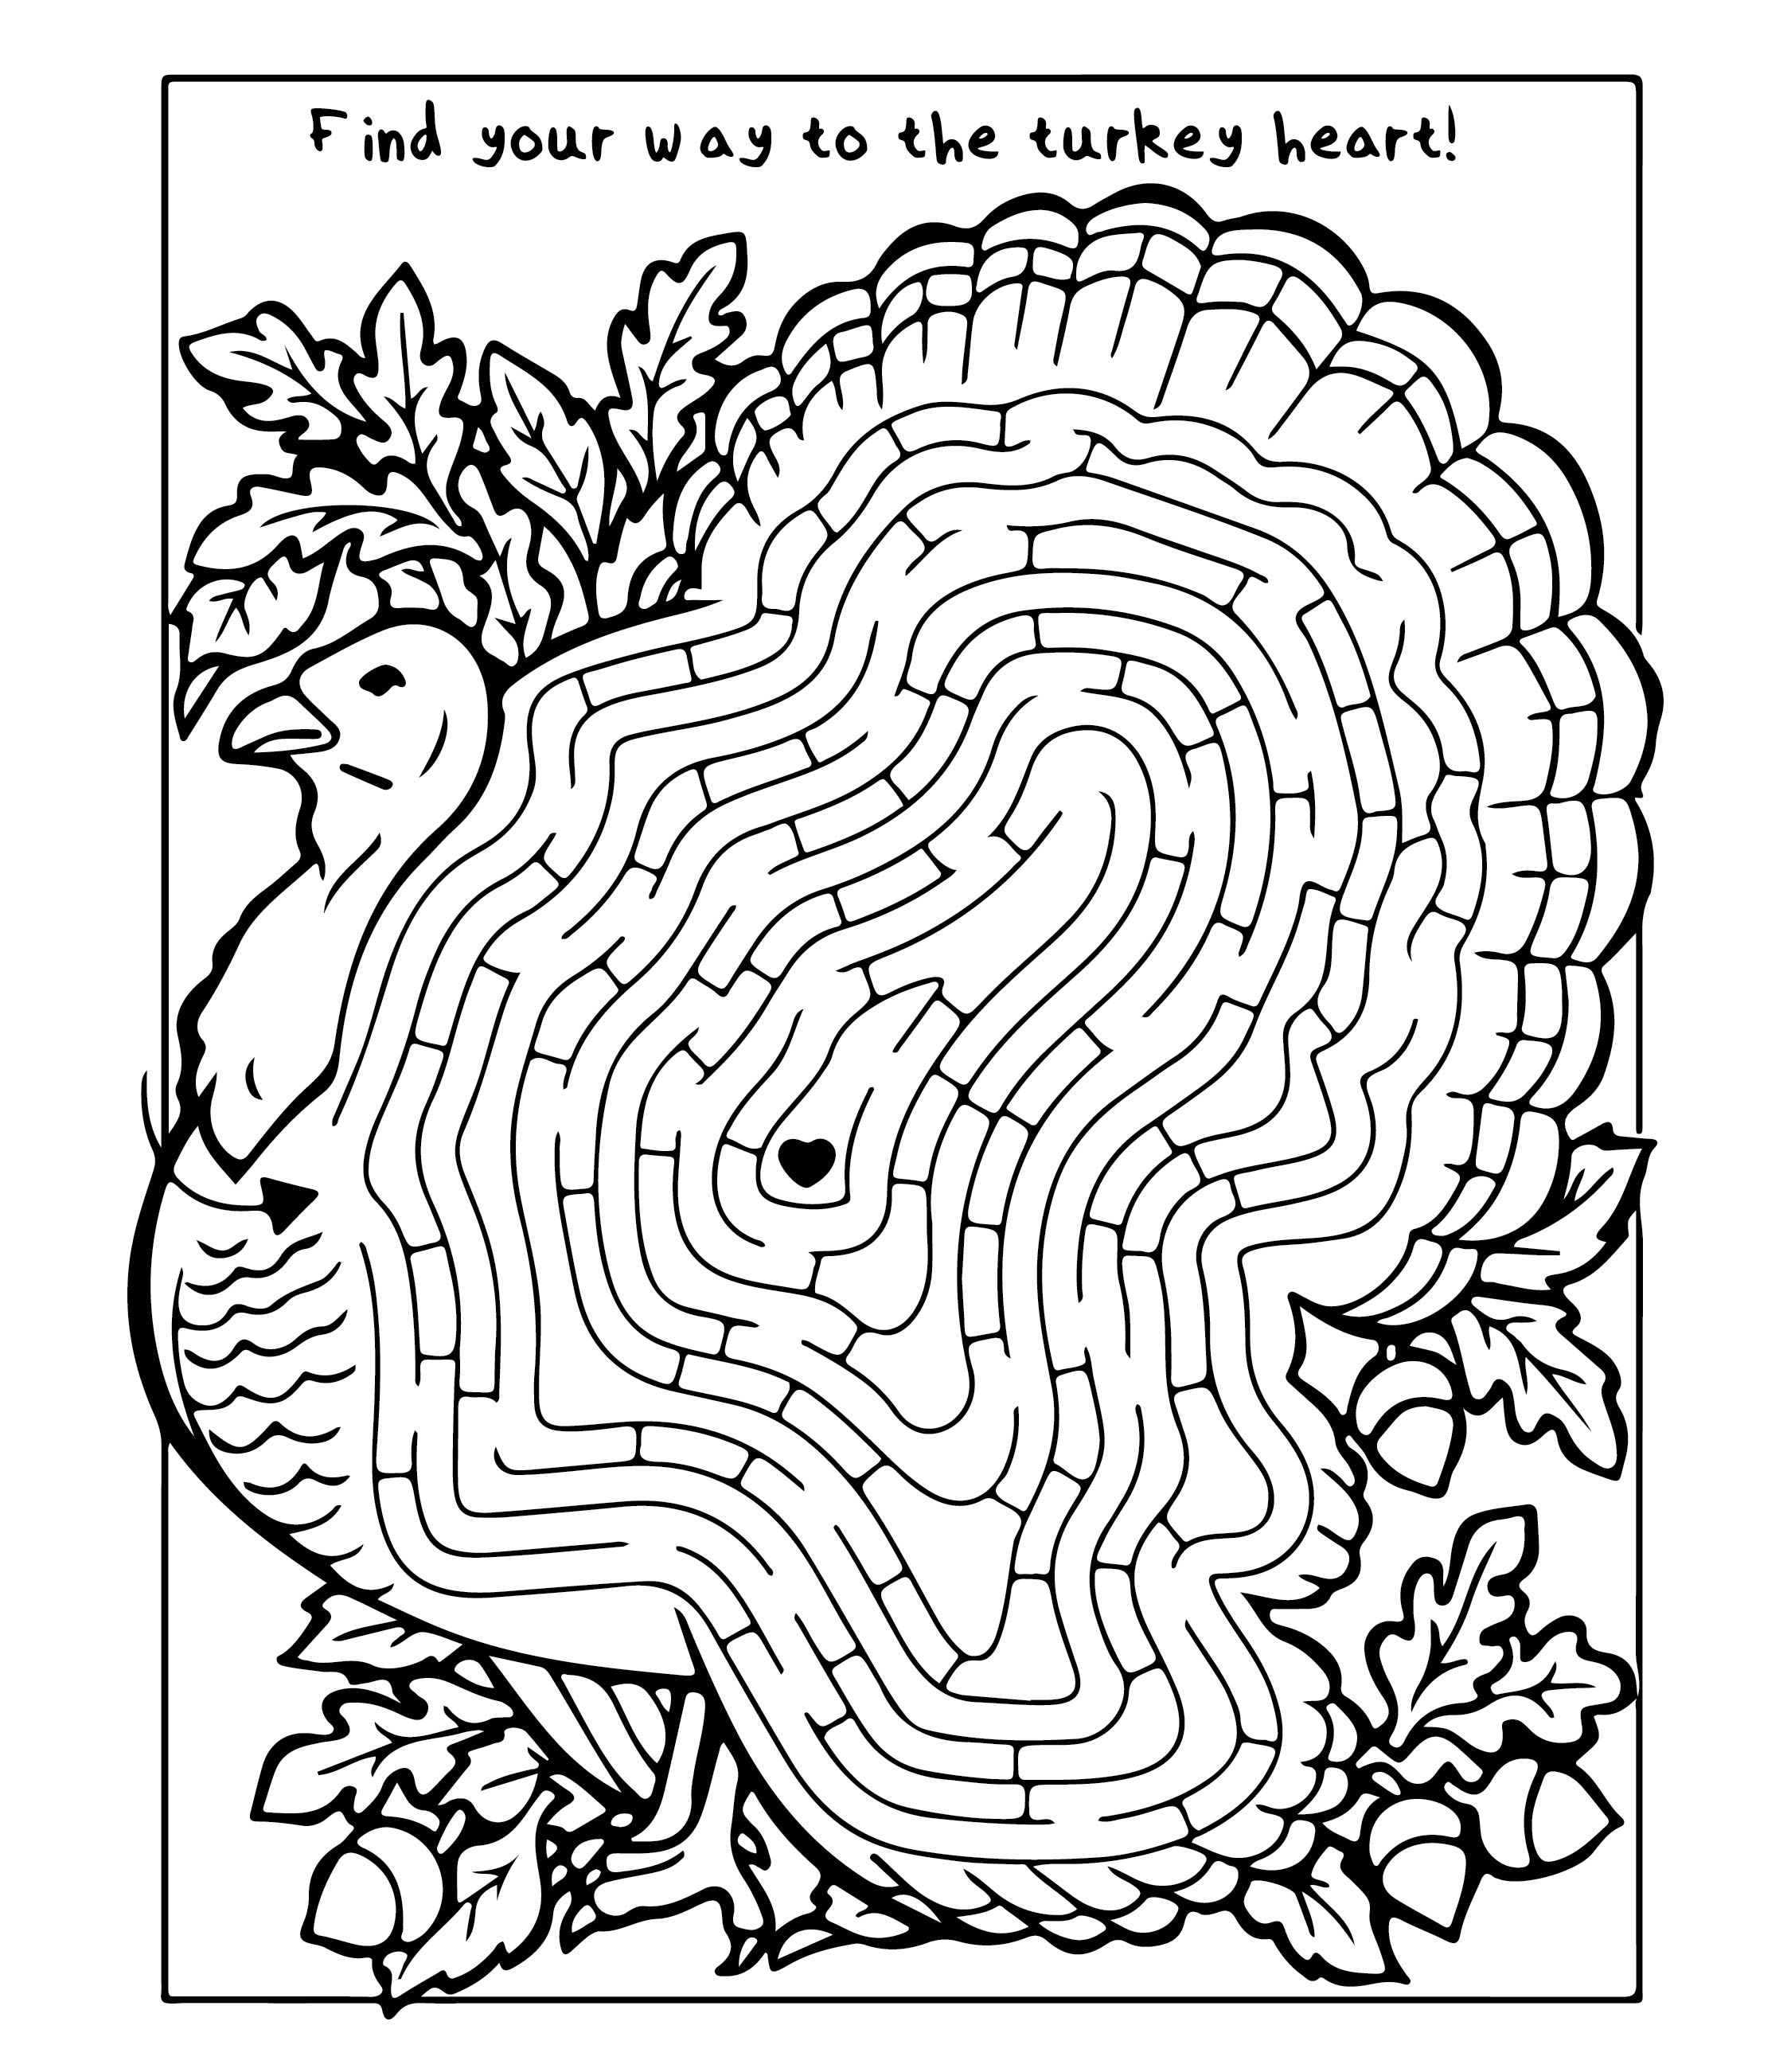 10-best-thanksgiving-activity-printables-pdf-for-free-at-printablee